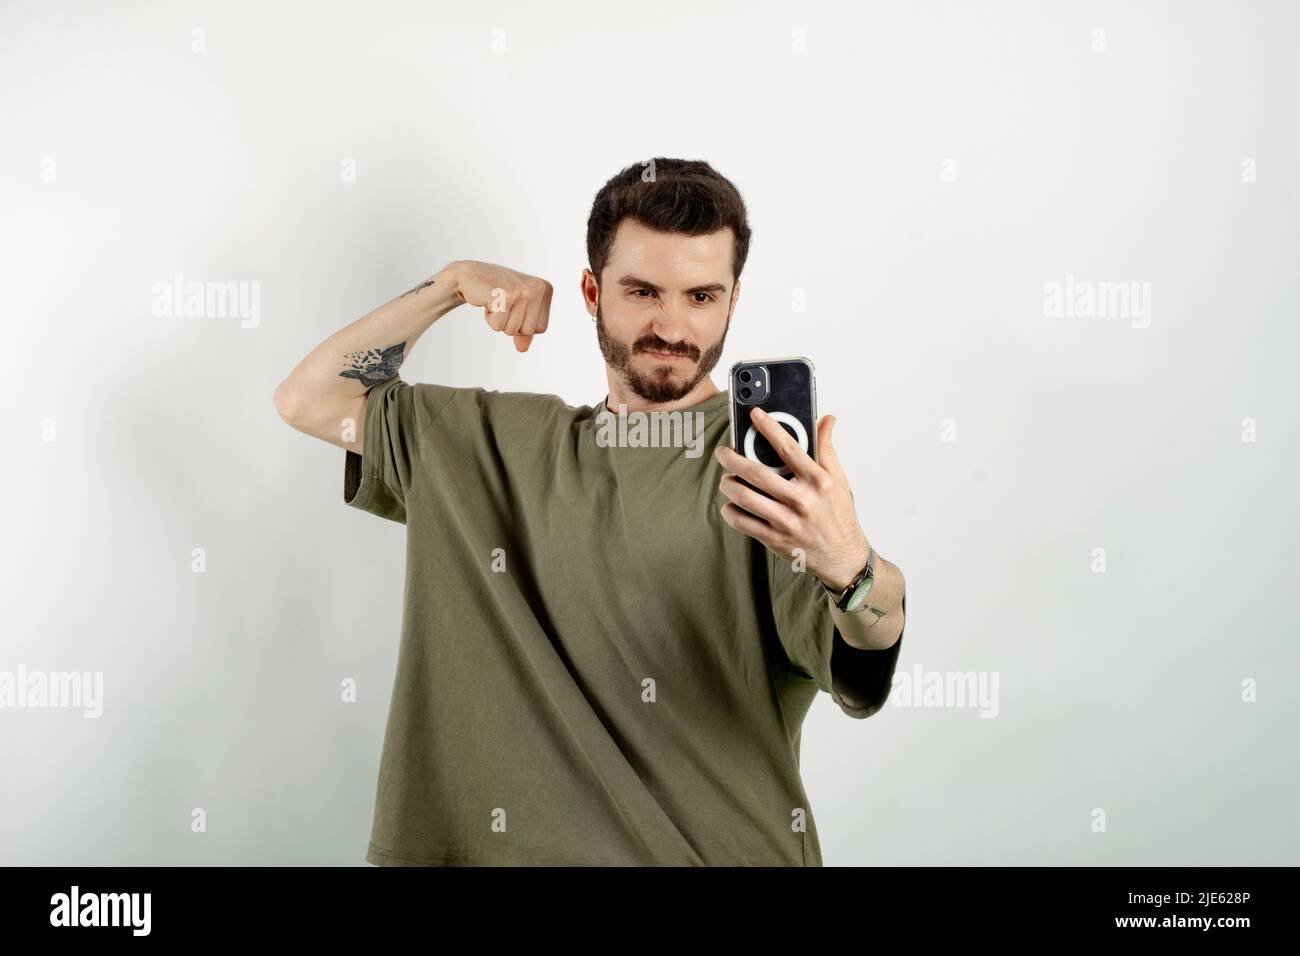 Handsome young man wearing casual clothes posing isolated over white background taking selfie, showing strong arm, flexing biceps and posing for photo Stock Photo